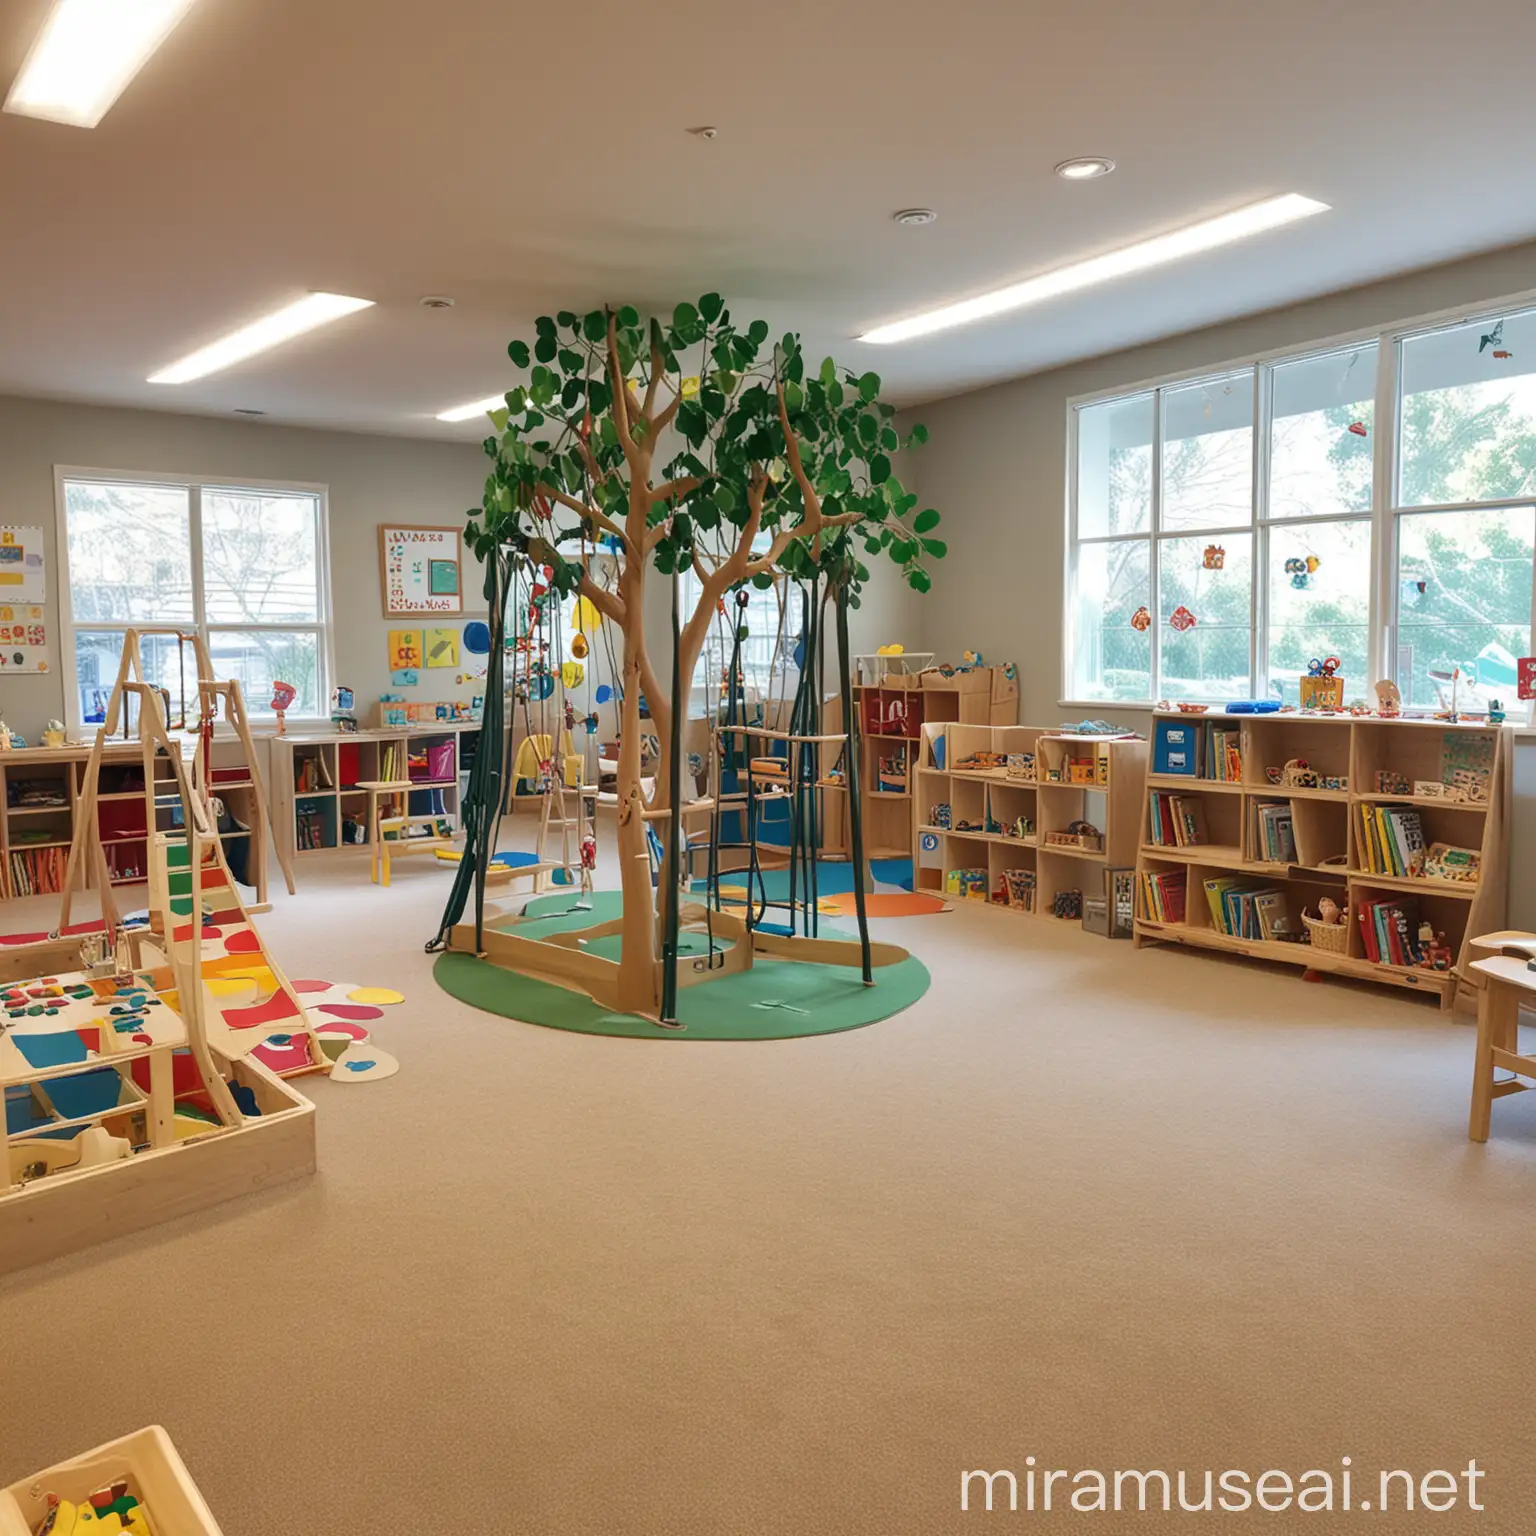 Design an engaging playschool classroom for kids. please focused on interactive play areas like few swings in classrooms. Incorporate imaginative themes, sensory stimulation,, flexible play spaces, and safety features to create a joyful and stimulating experience for children